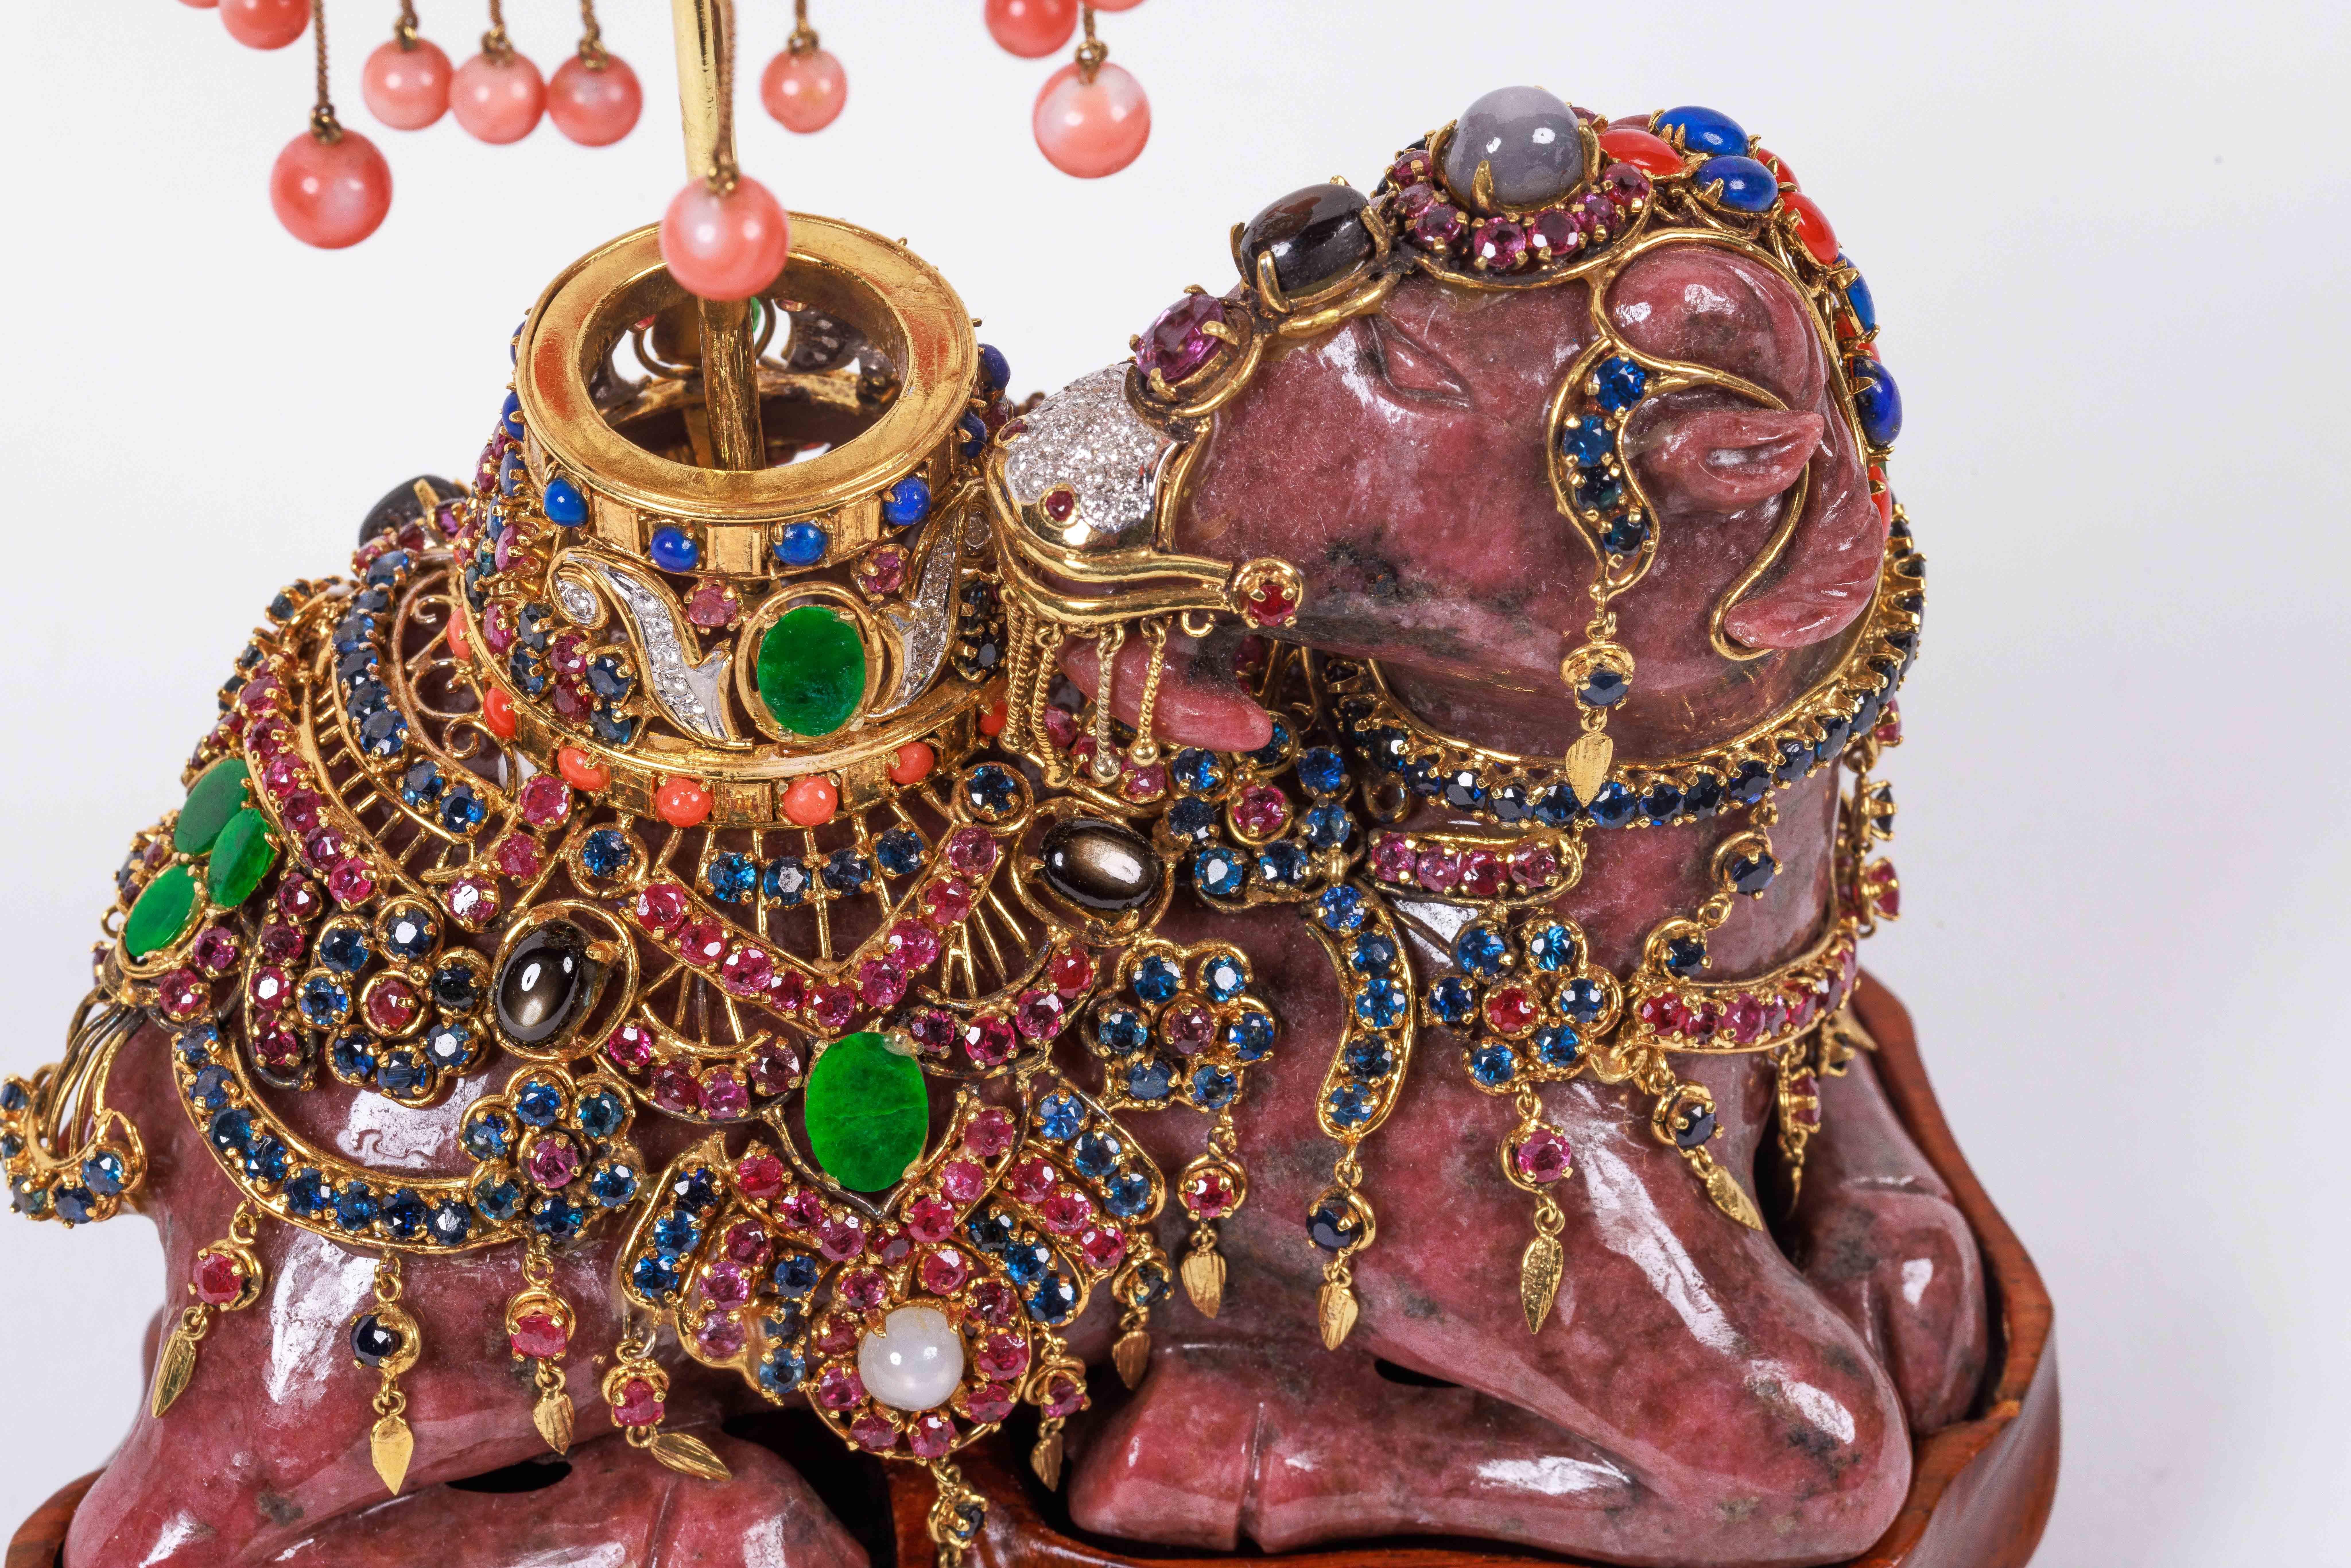 An Exquisite 14K Gold, Diamonds, Emeralds, Rubies, Sapphires, and Semi Precious Stone Mounted Rhodonite Camel. 

Possibly by Verdura, circa 1970, Italy.

A very good quality and unusual gold mounted jeweled object, depicting a seated camel